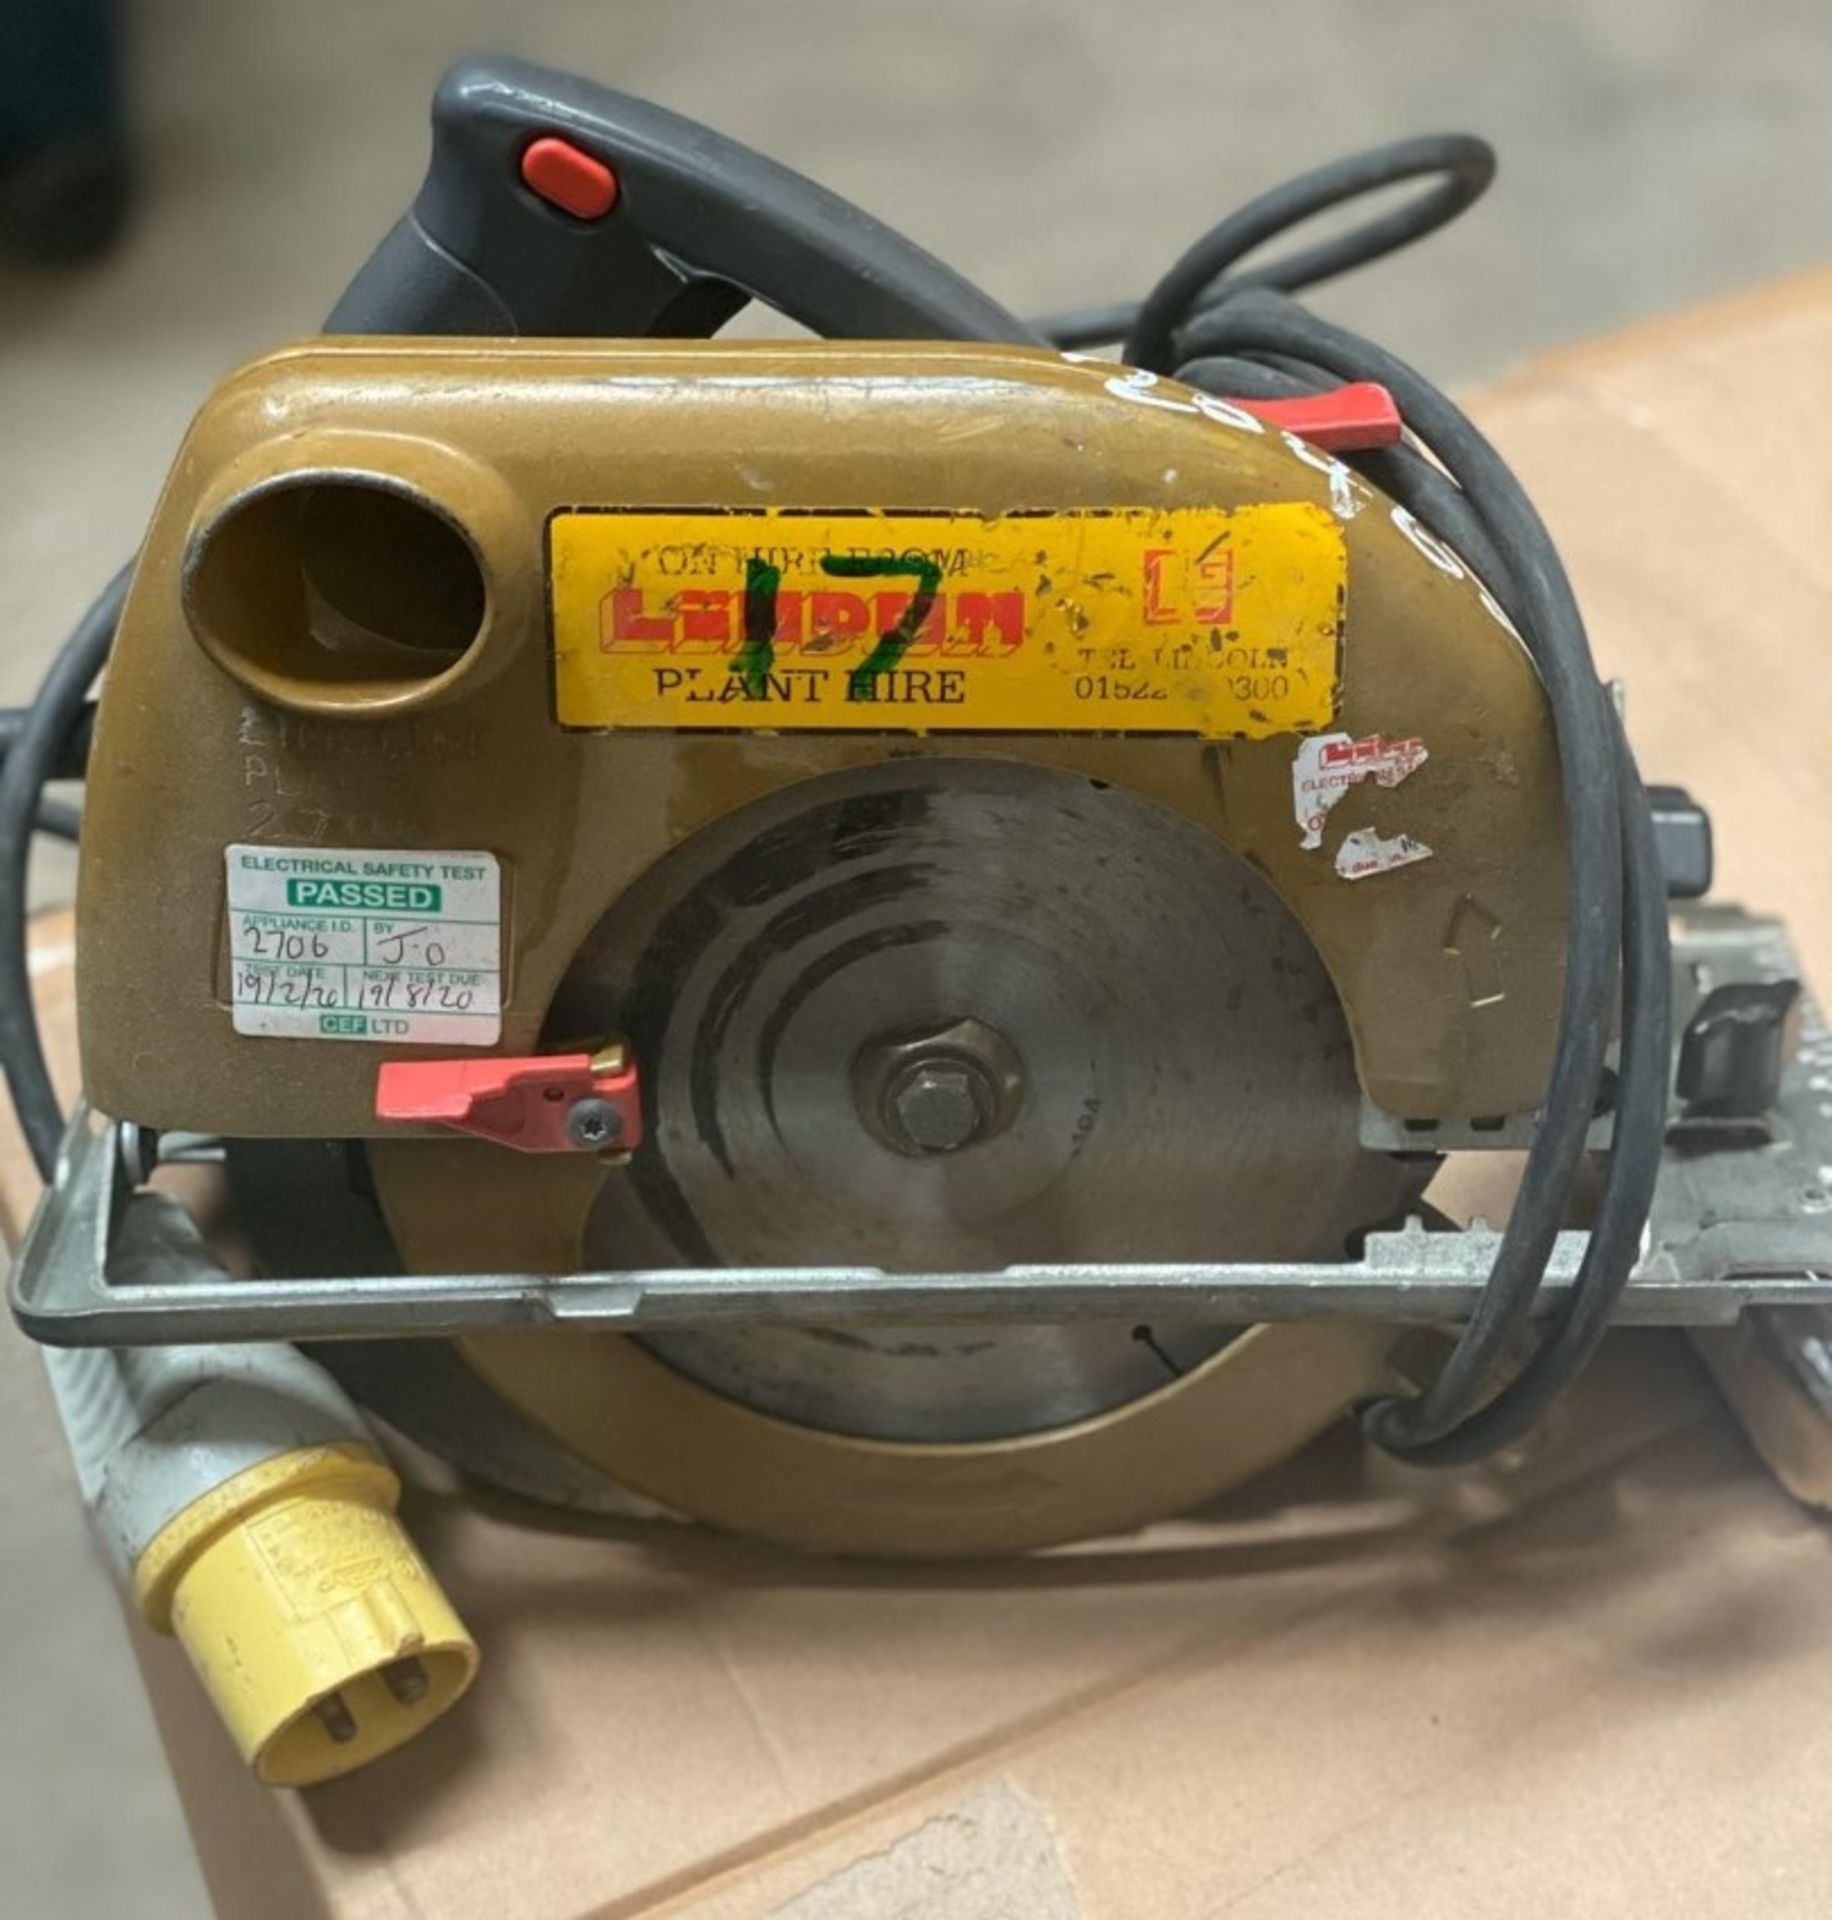 1 x Skill 110v Saw - Used, Recently Removed From A Working Site - CL505 - Ref: TL017 - Location: